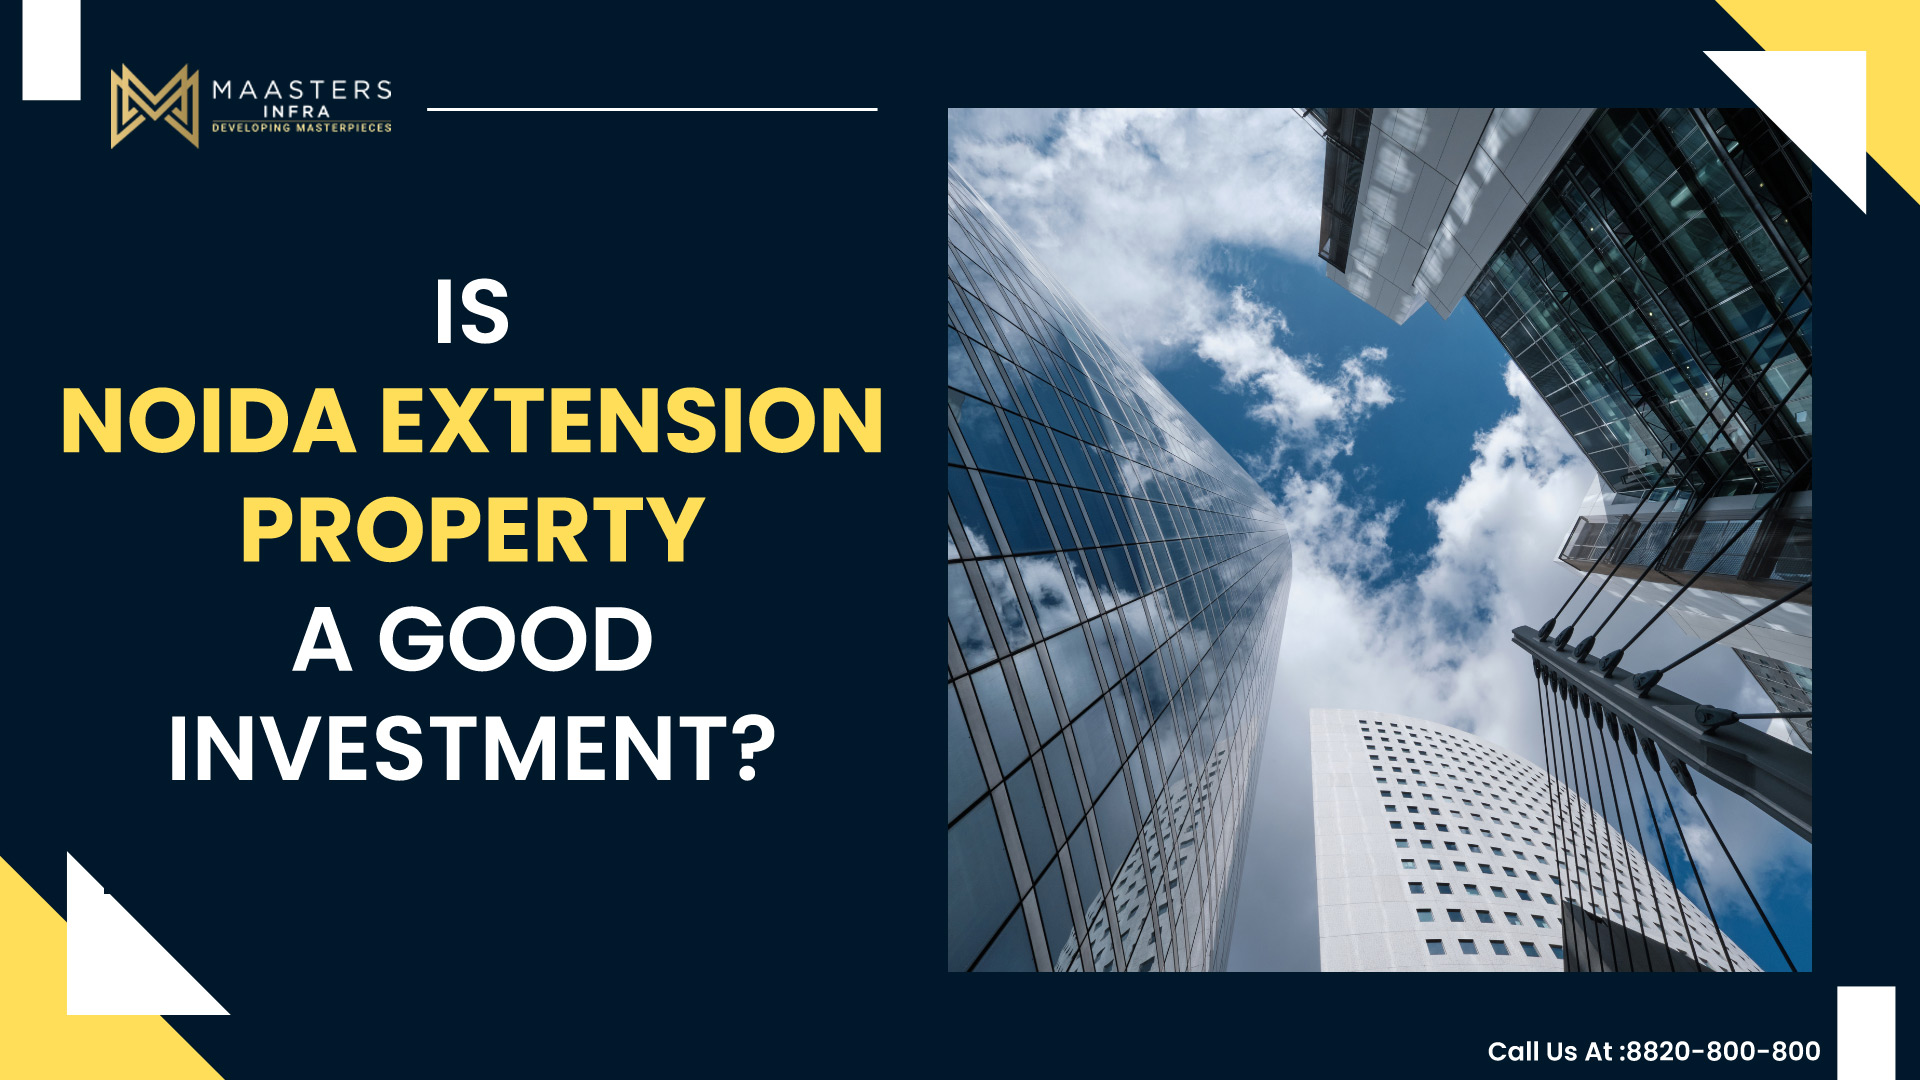 IS NOIDA EXTENSION PROPERTY A GOOD INVESTMENT?